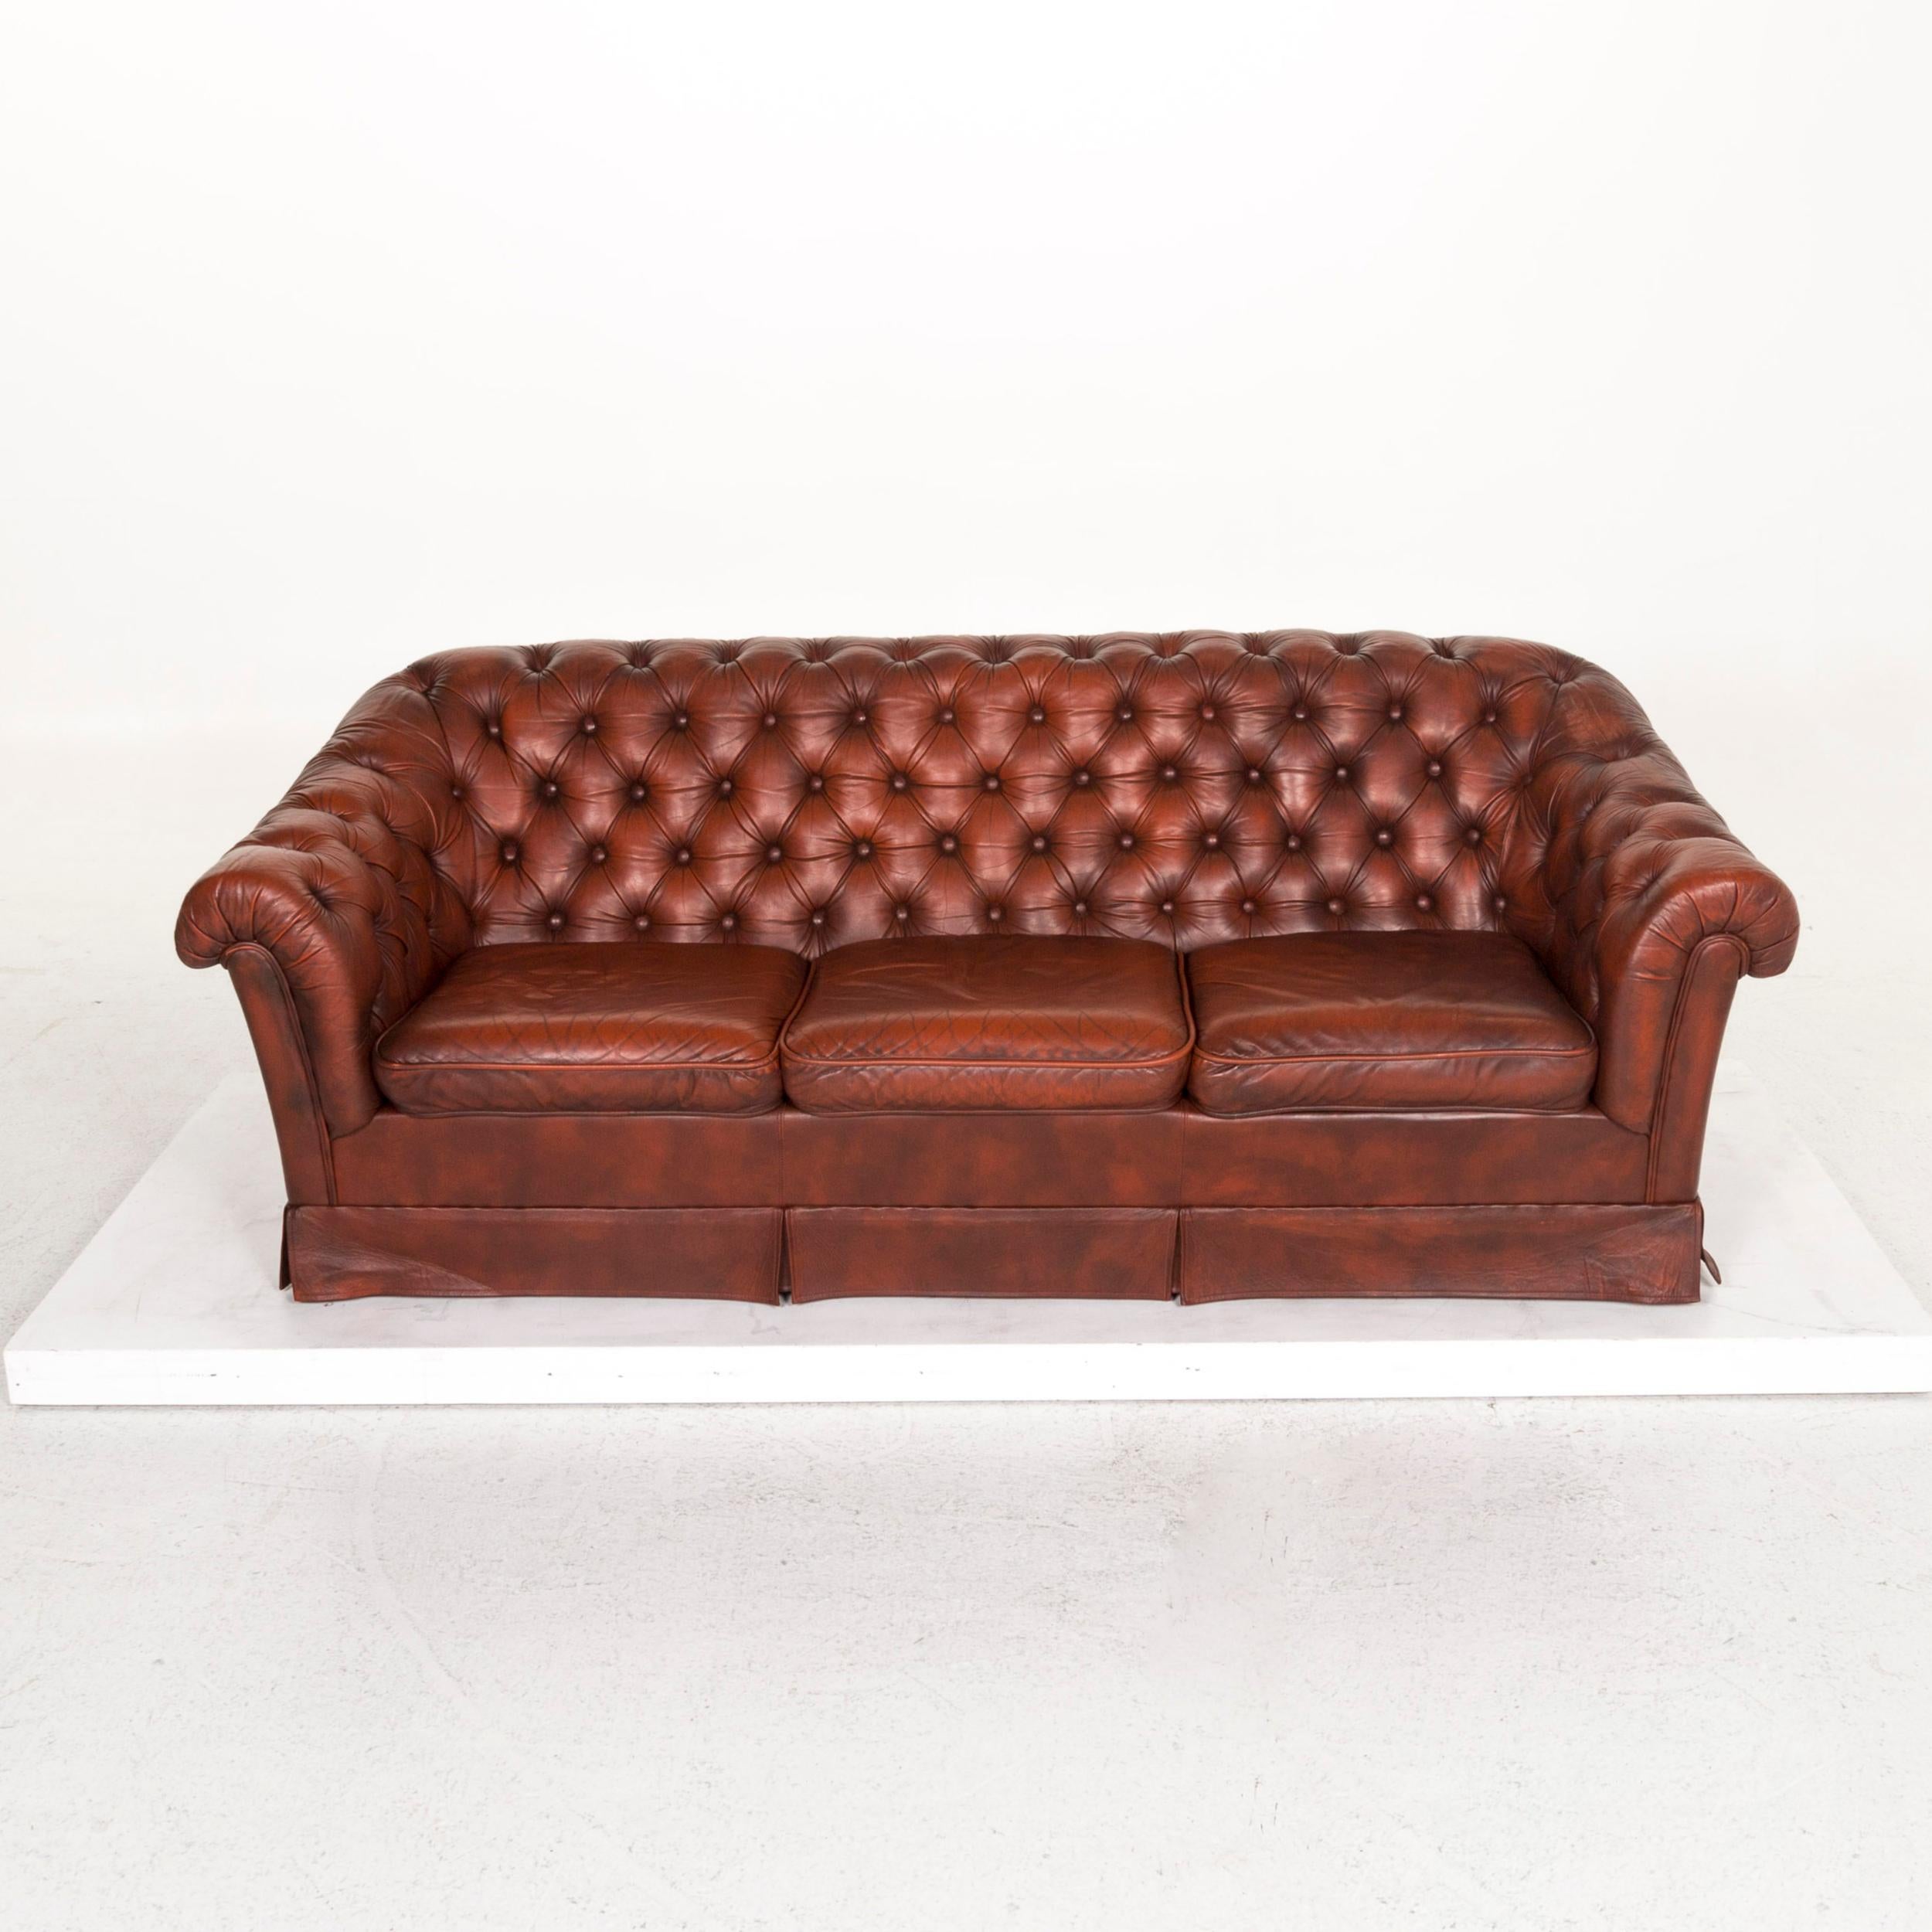 Chesterfield Leather Sofa Red Three-Seat Retro Vintage Couch In Good Condition For Sale In Cologne, DE